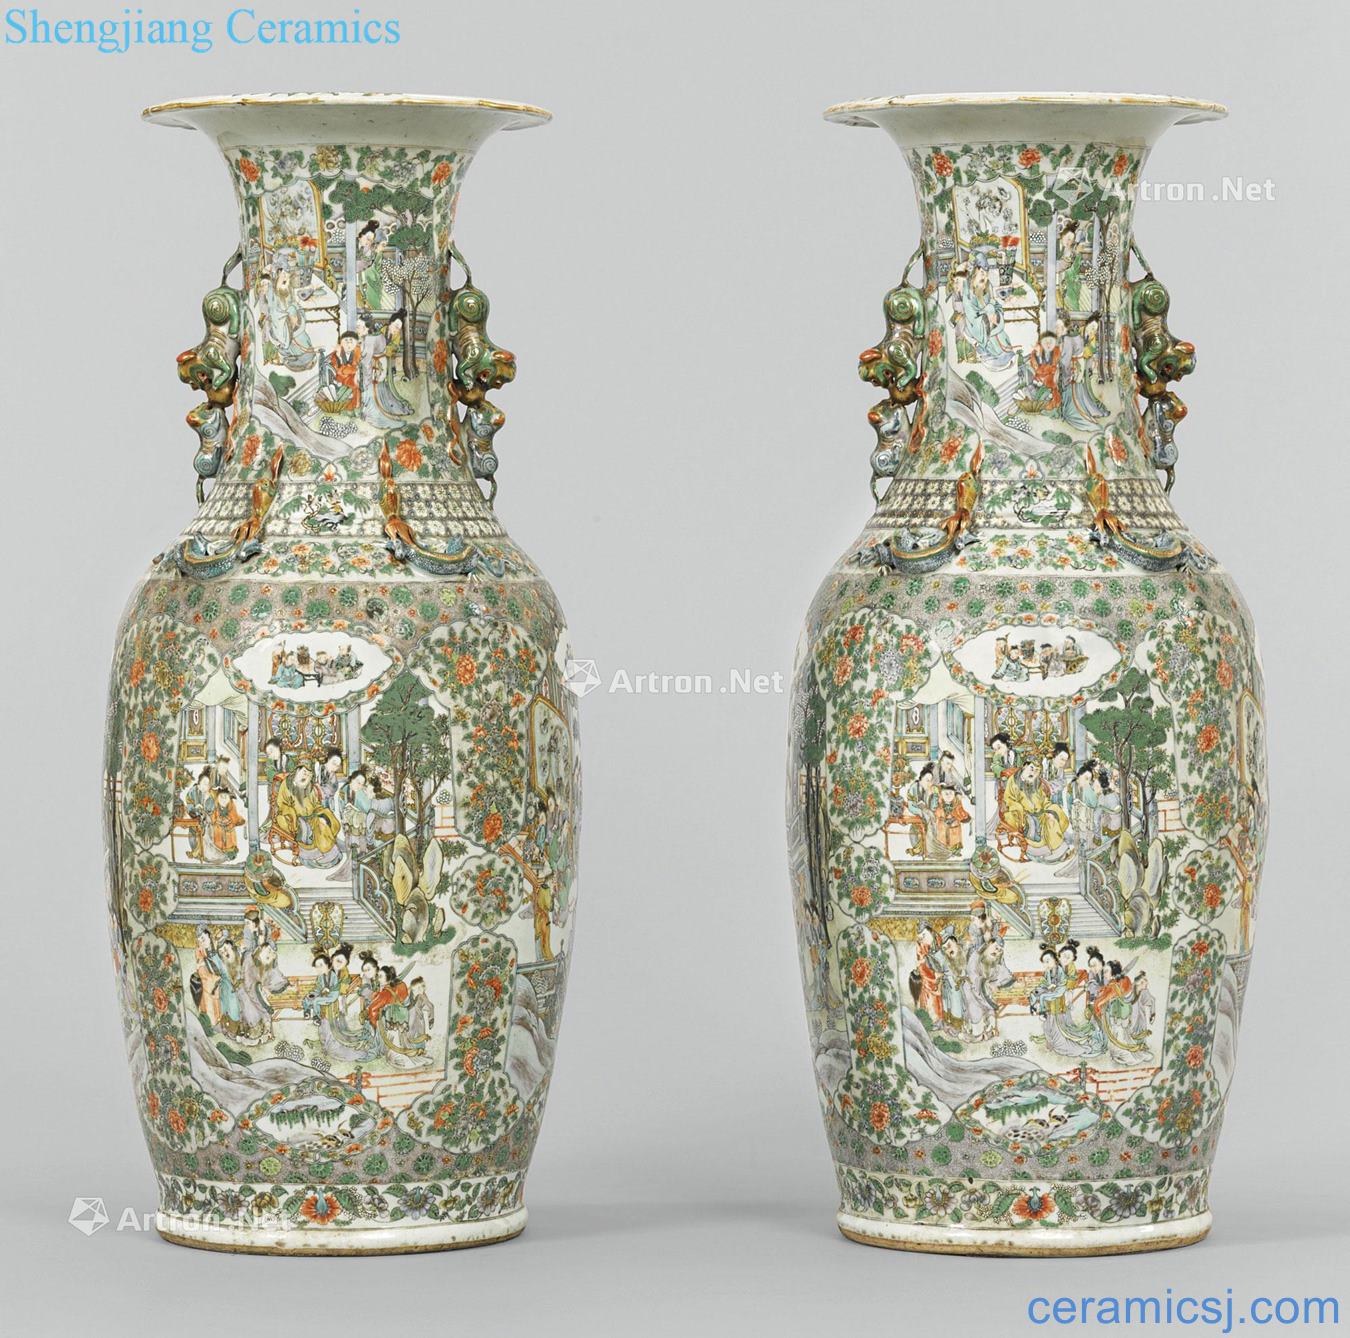 Qing dynasty in the 19th century Colorful flowers medallion "three kingdoms" vase with a lion, a pair of (a)